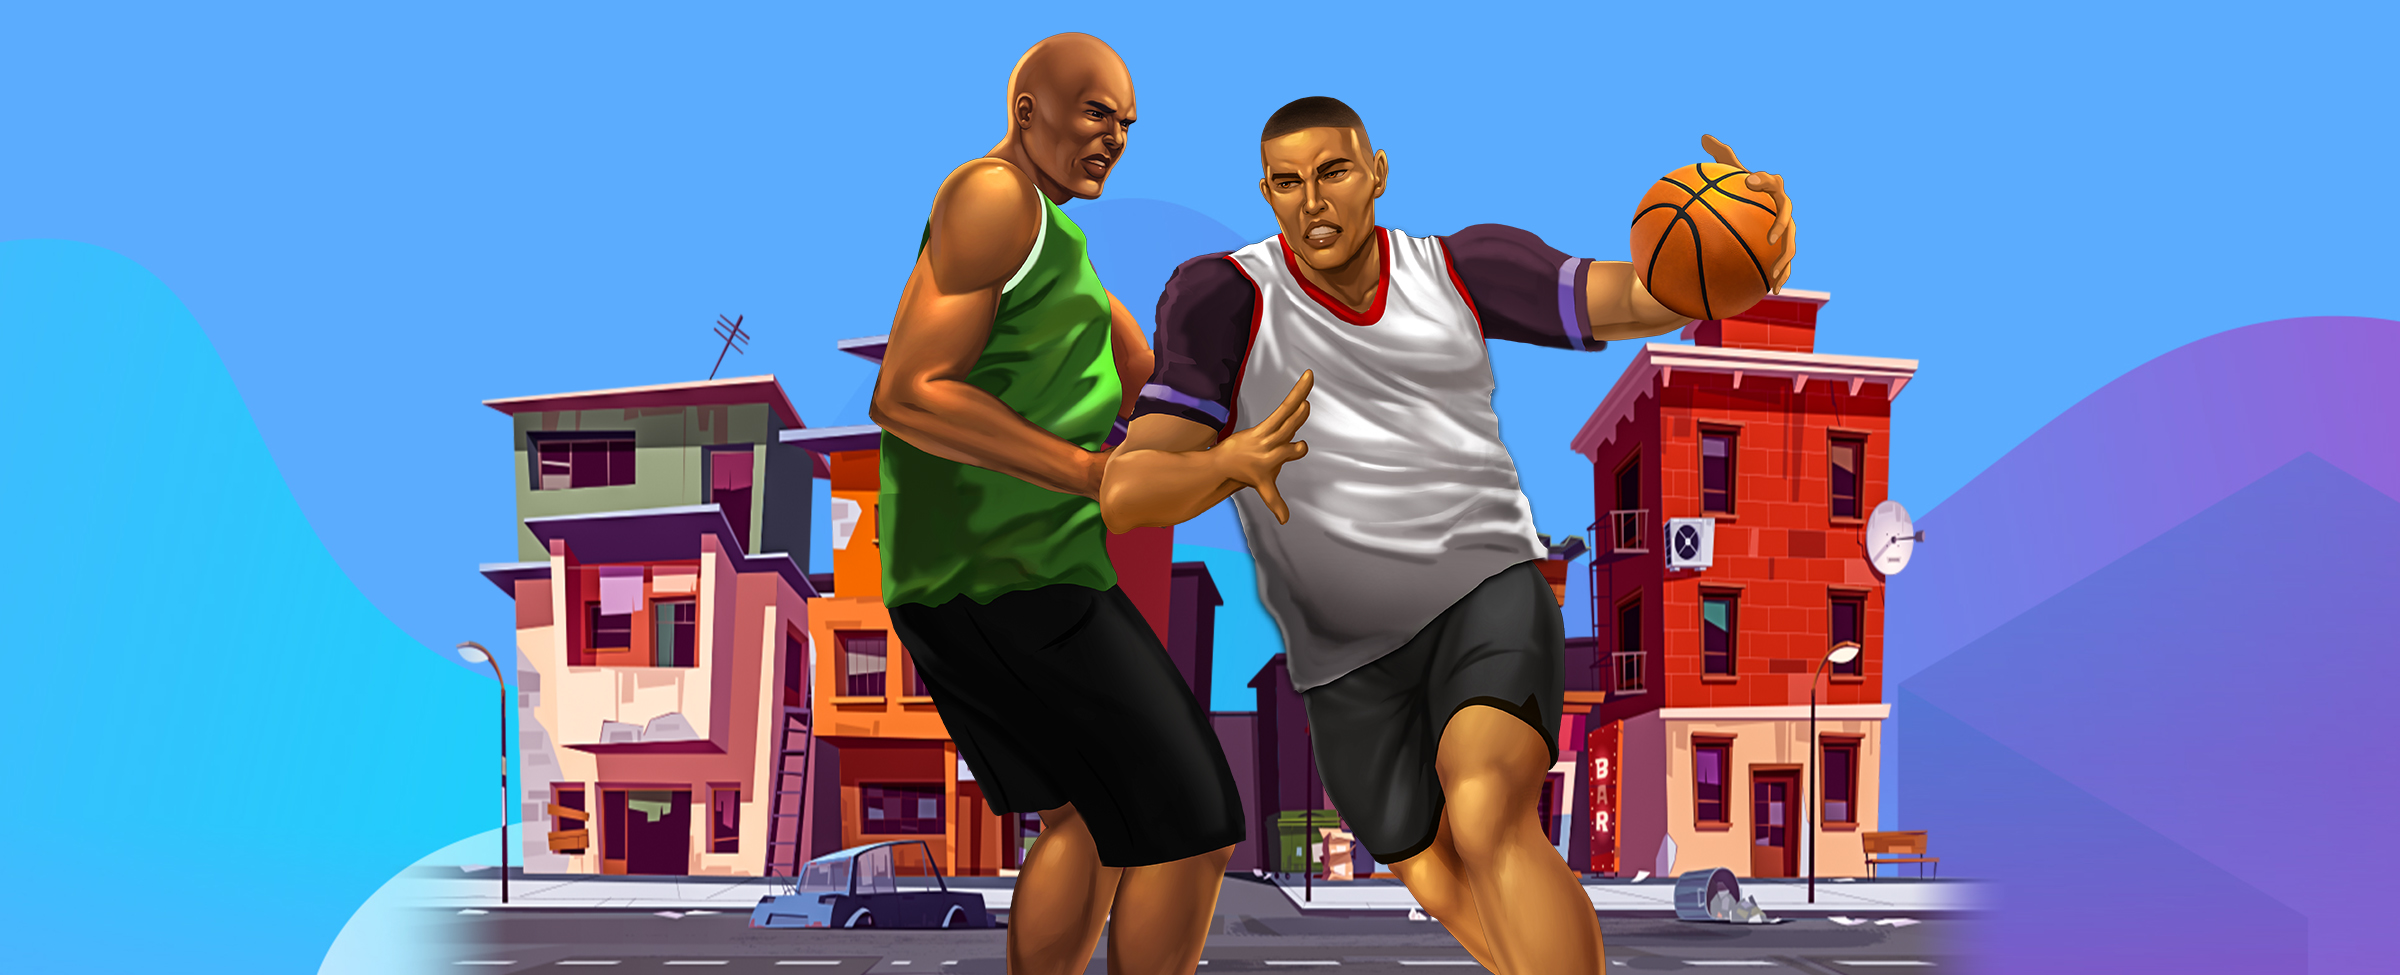 You don’t have to be in the NBA to be a basketball star – we’ve brought the court not only to your street, but your mobile with Streetball Star.